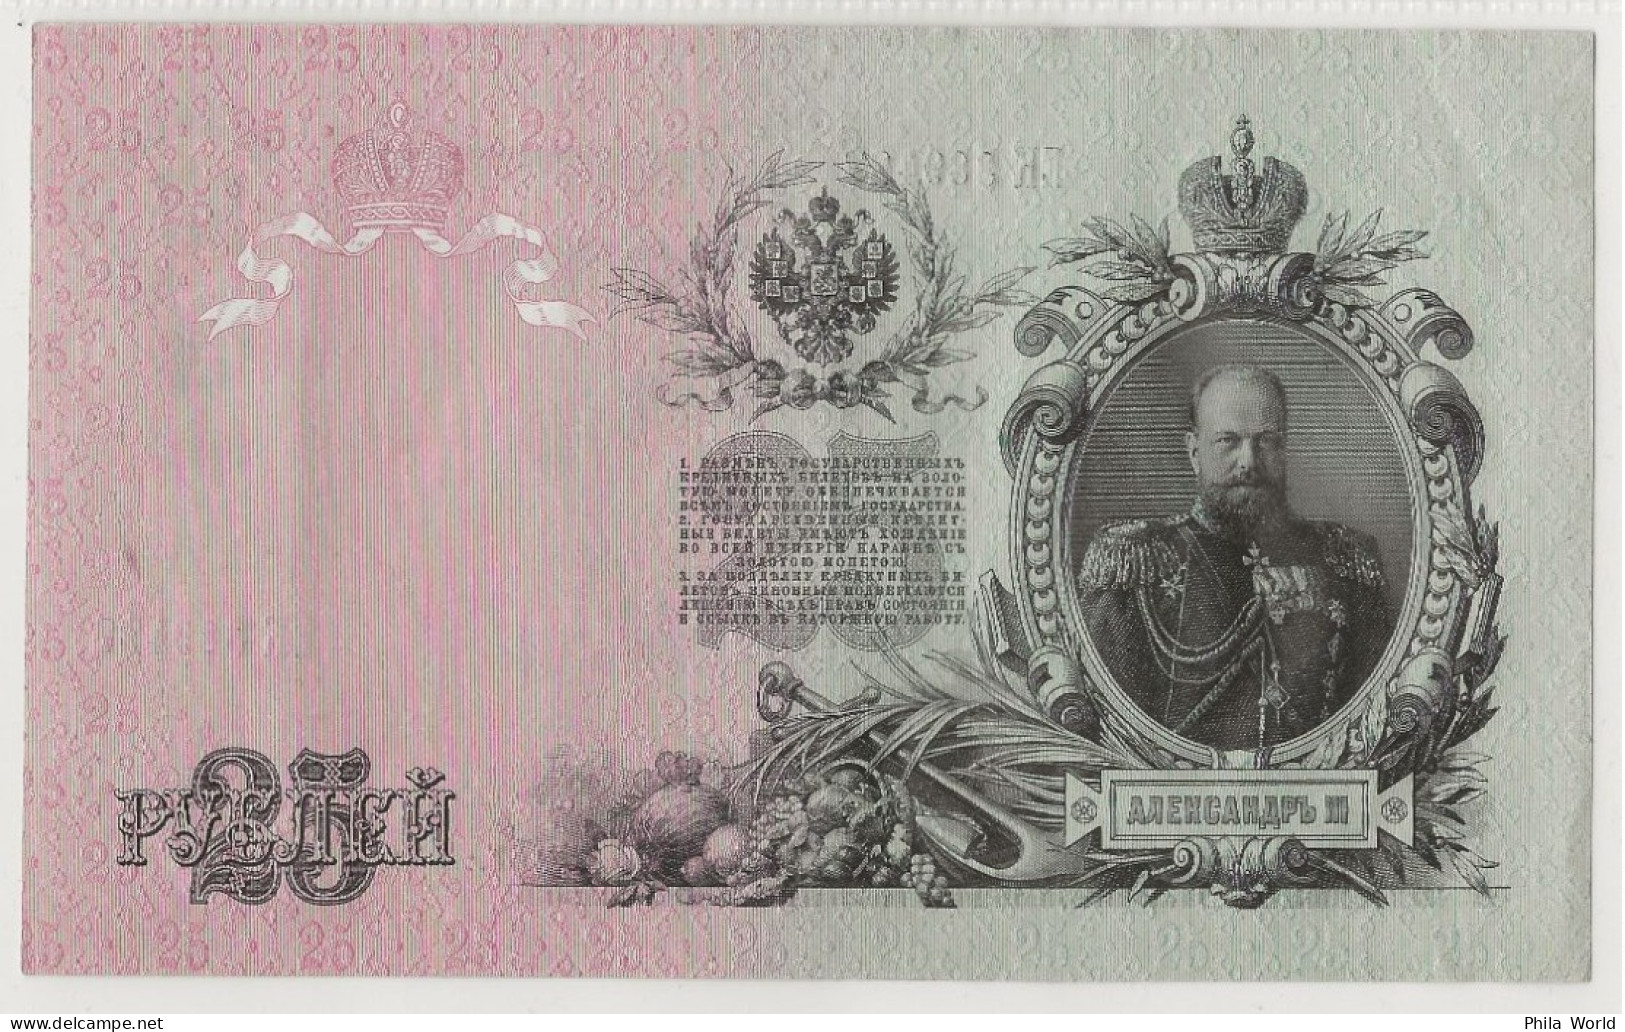 RUSSIE RUSSIA 25 ROUBLES Rubles Russian 1909 Billet Banque Bank Note Banknote Alexandre Alexander III Shipov Gusev - Russie